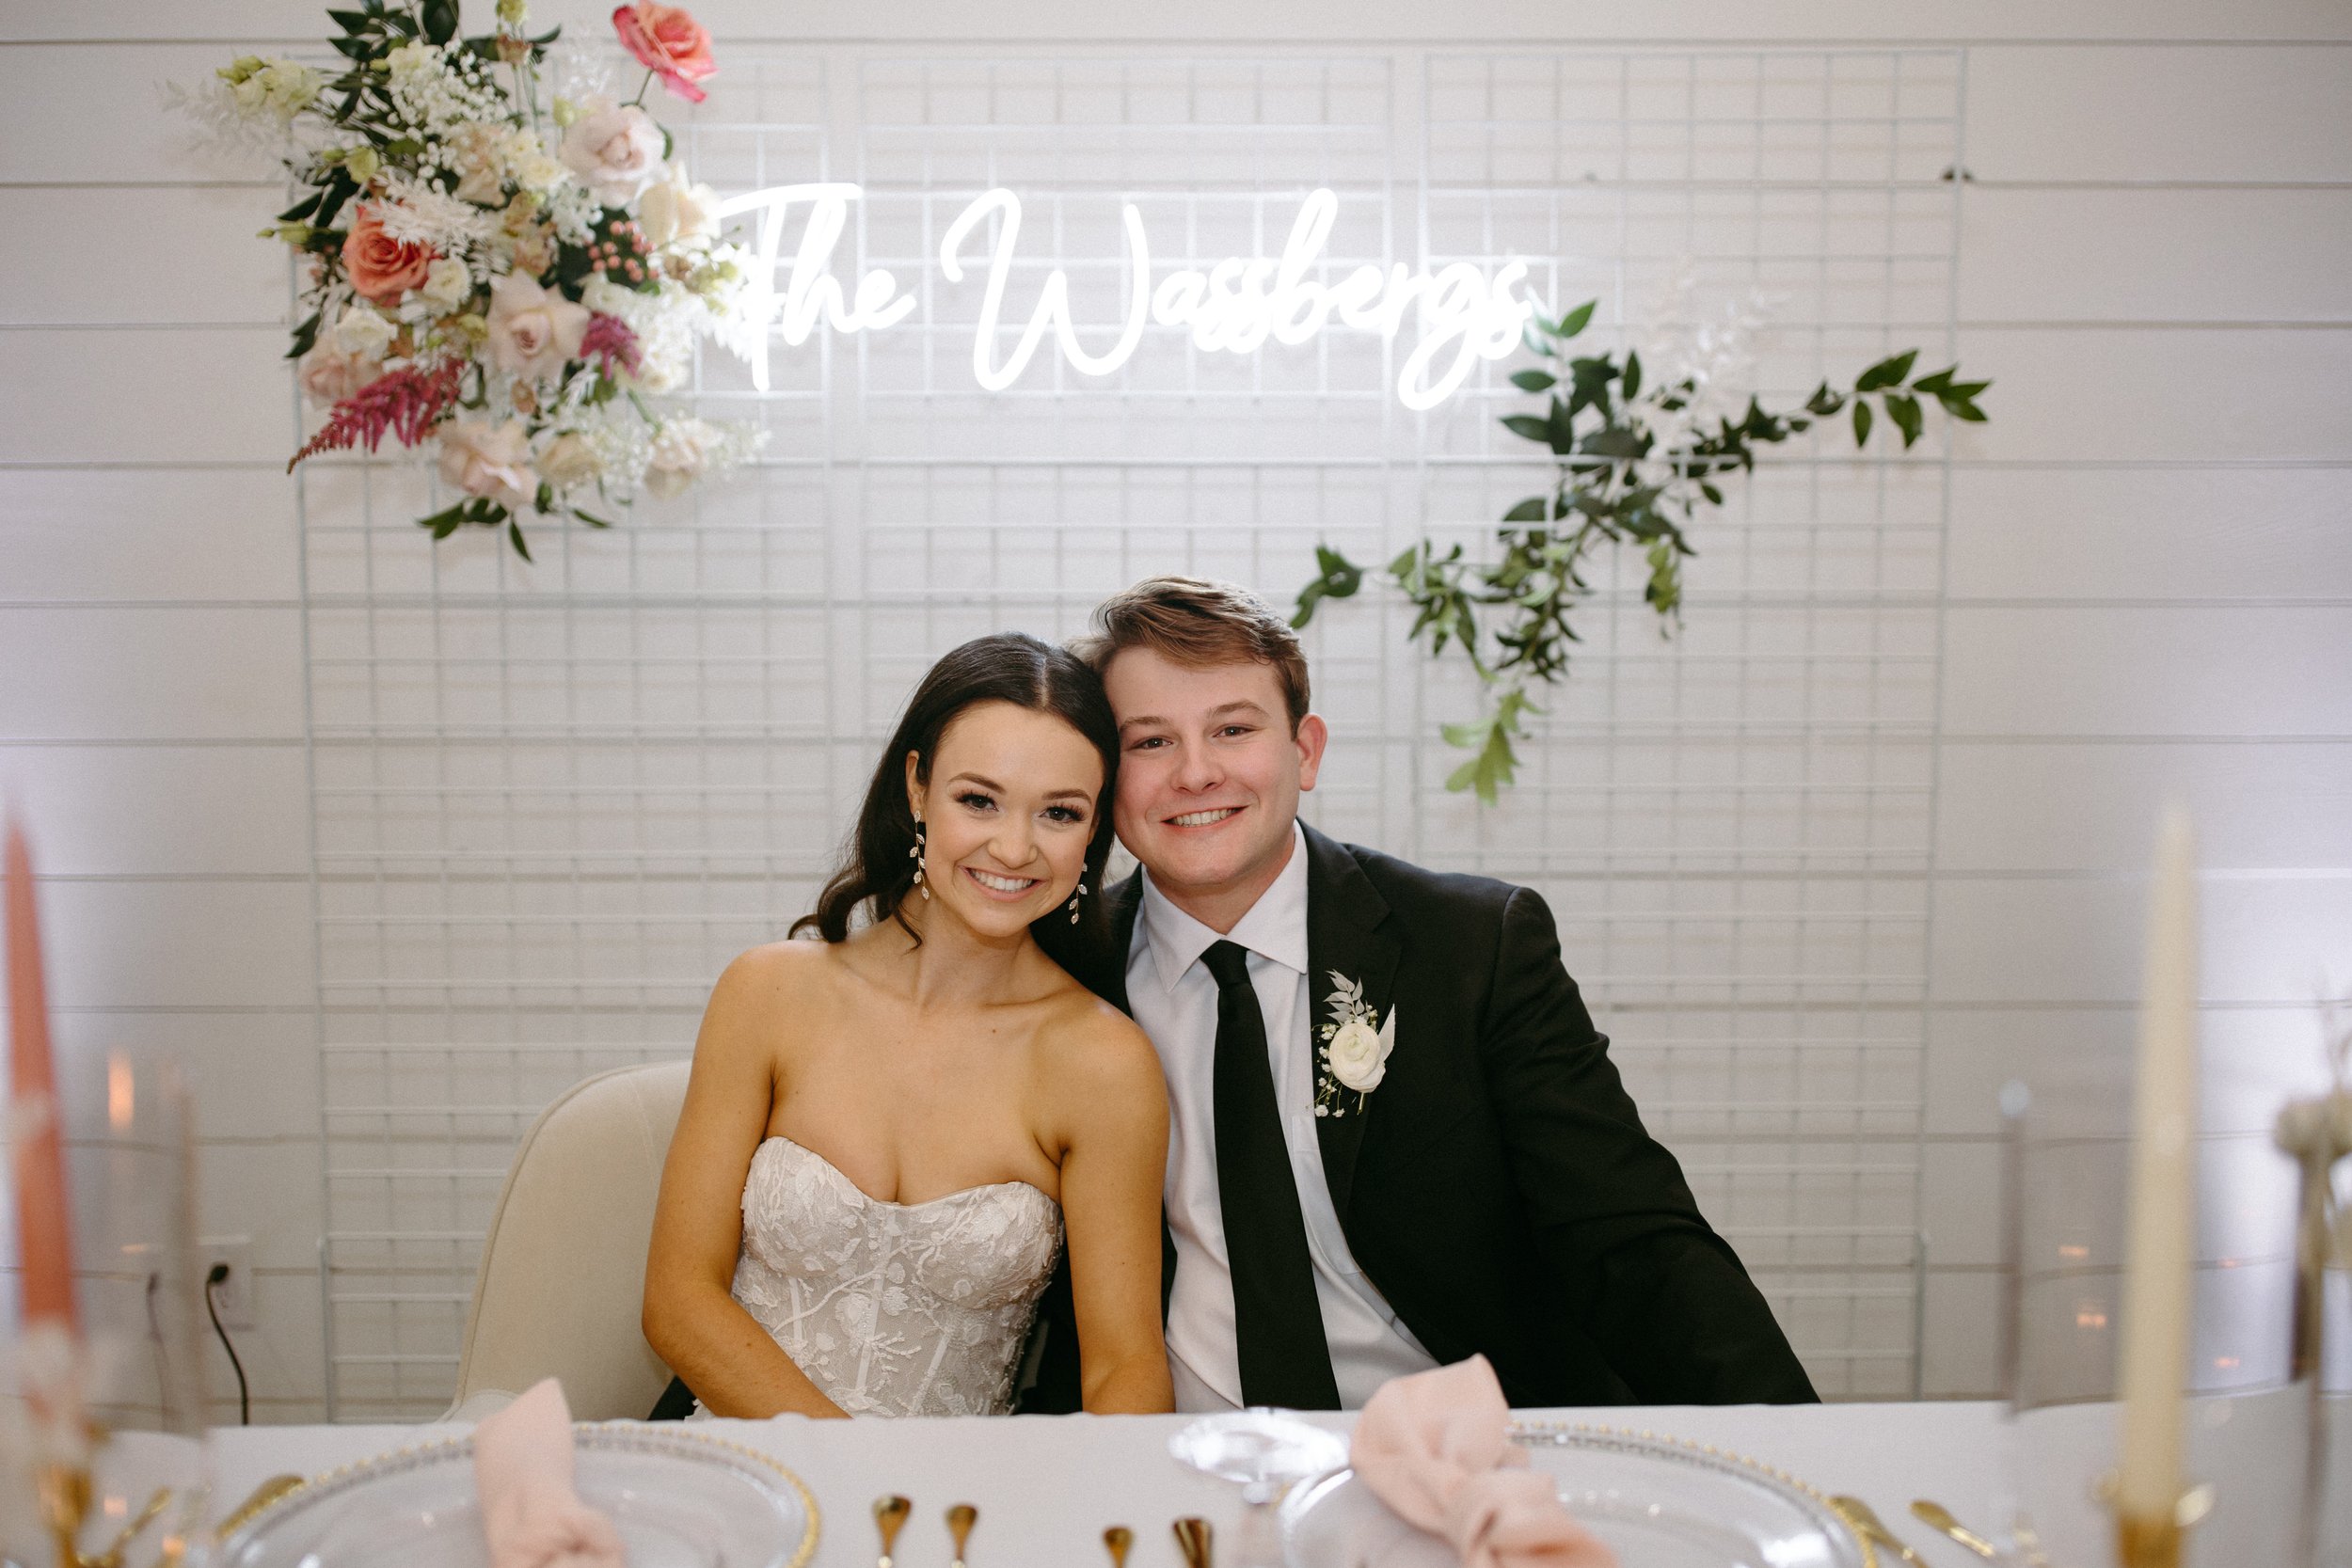 neon sign backdrop at this modern wedding reception.